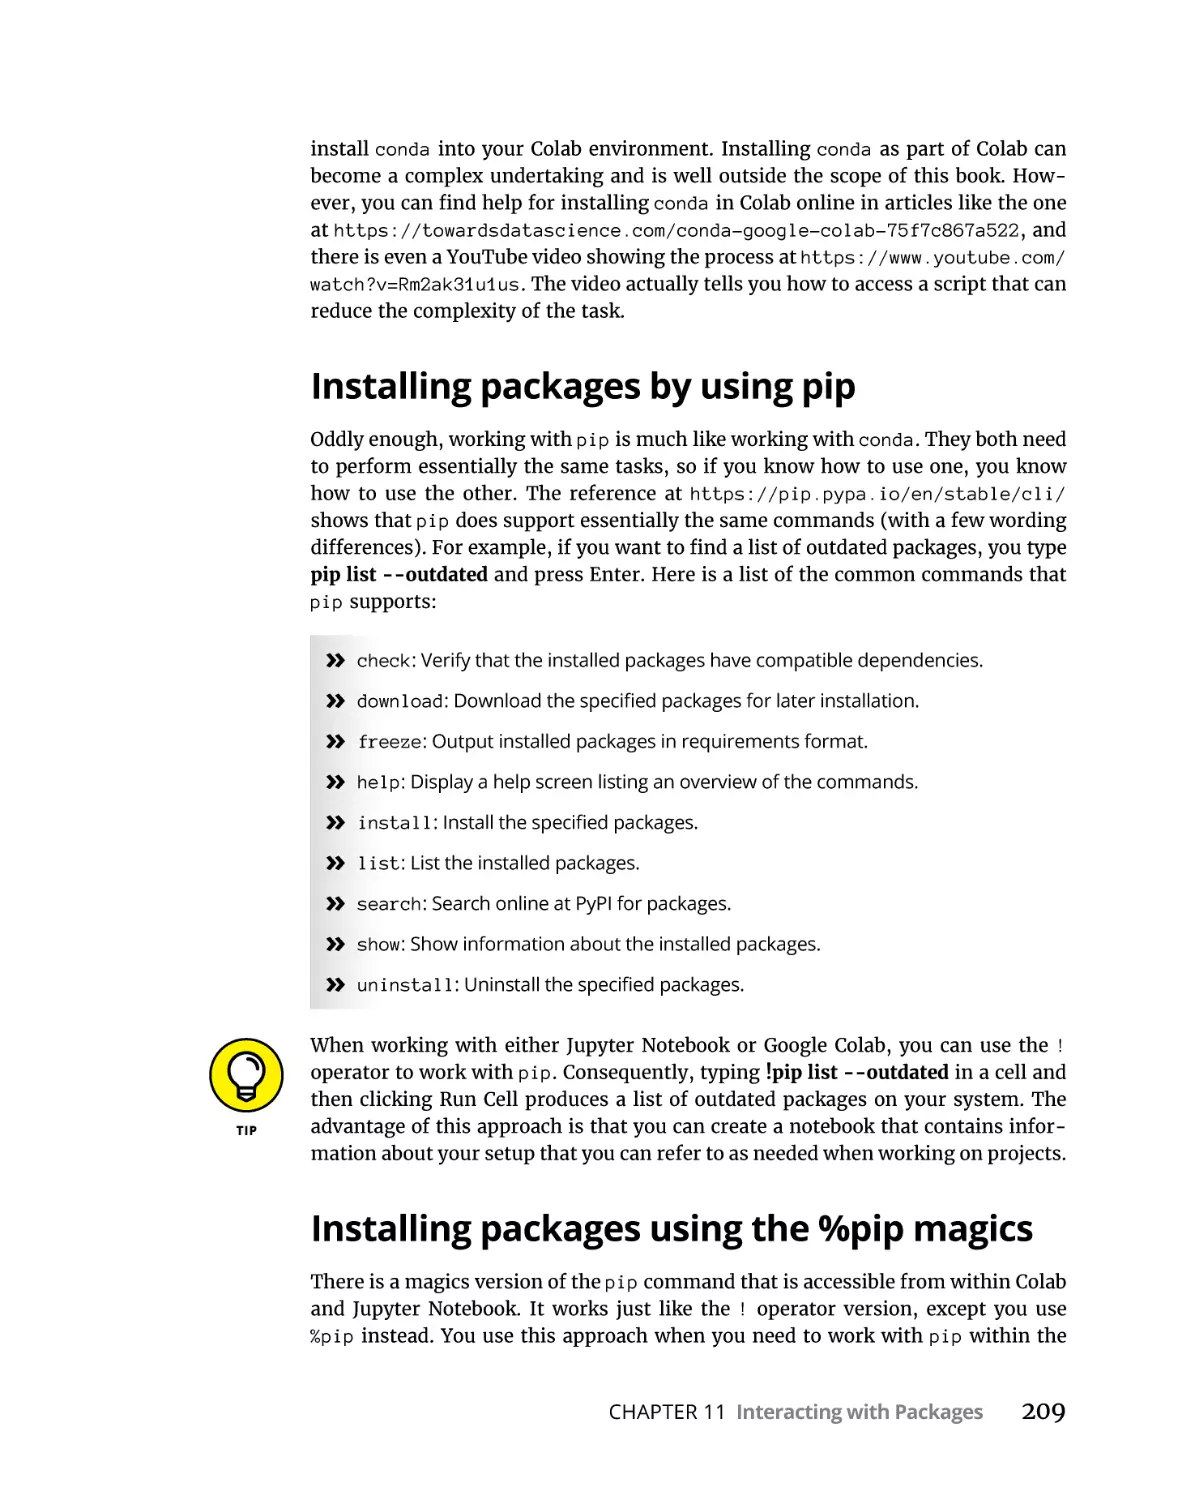 Installing packages by using pip
Installing packages using the %pip magics